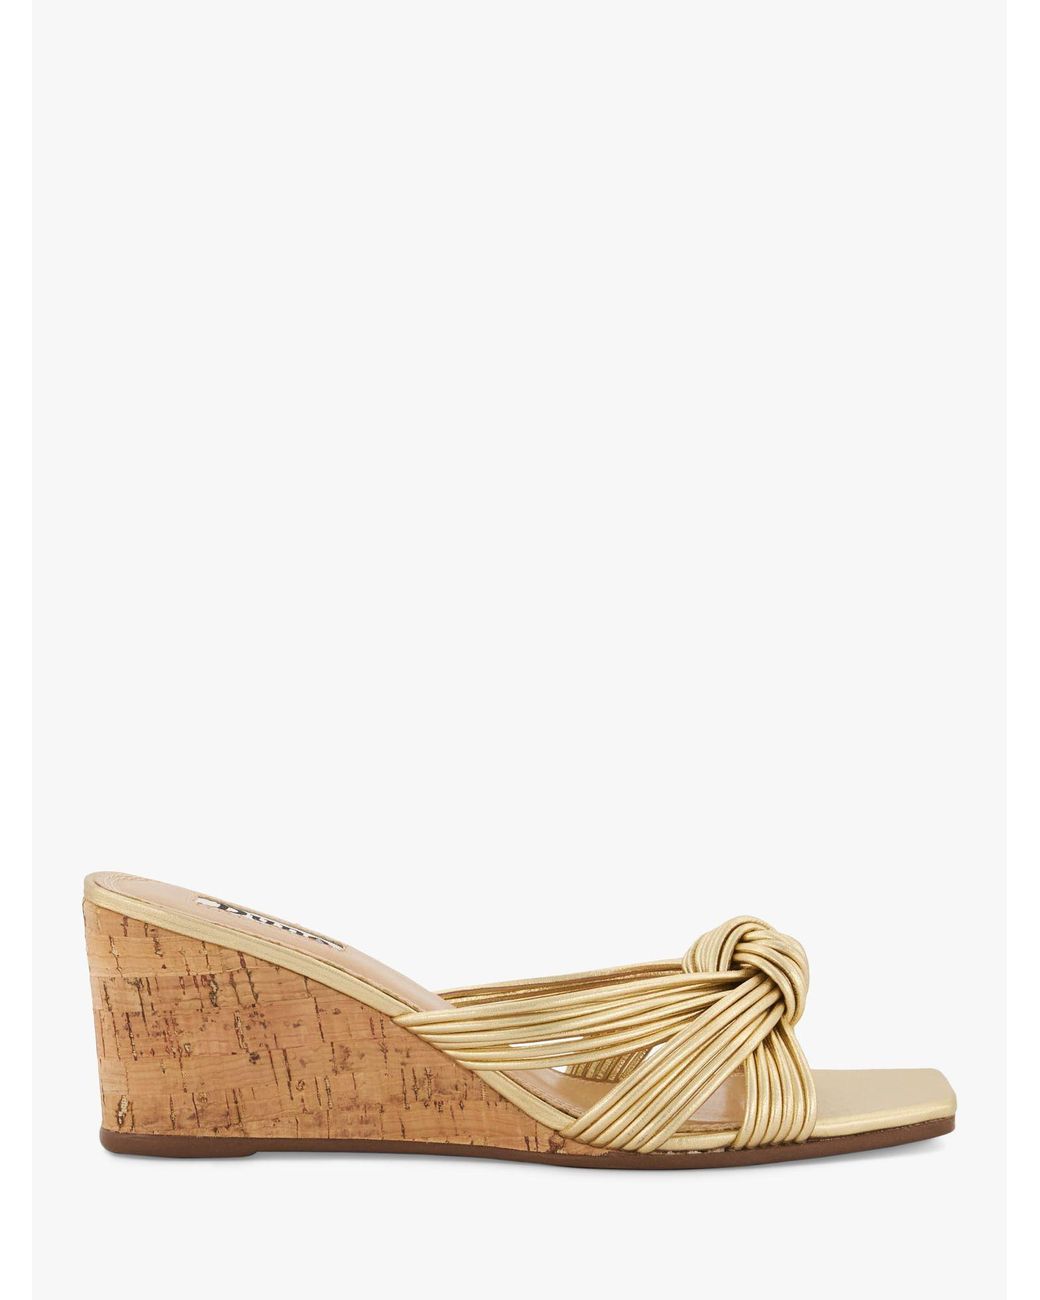 Dune Kope Leather Knot Slim Wedge Sandals in Natural | Lyst UK